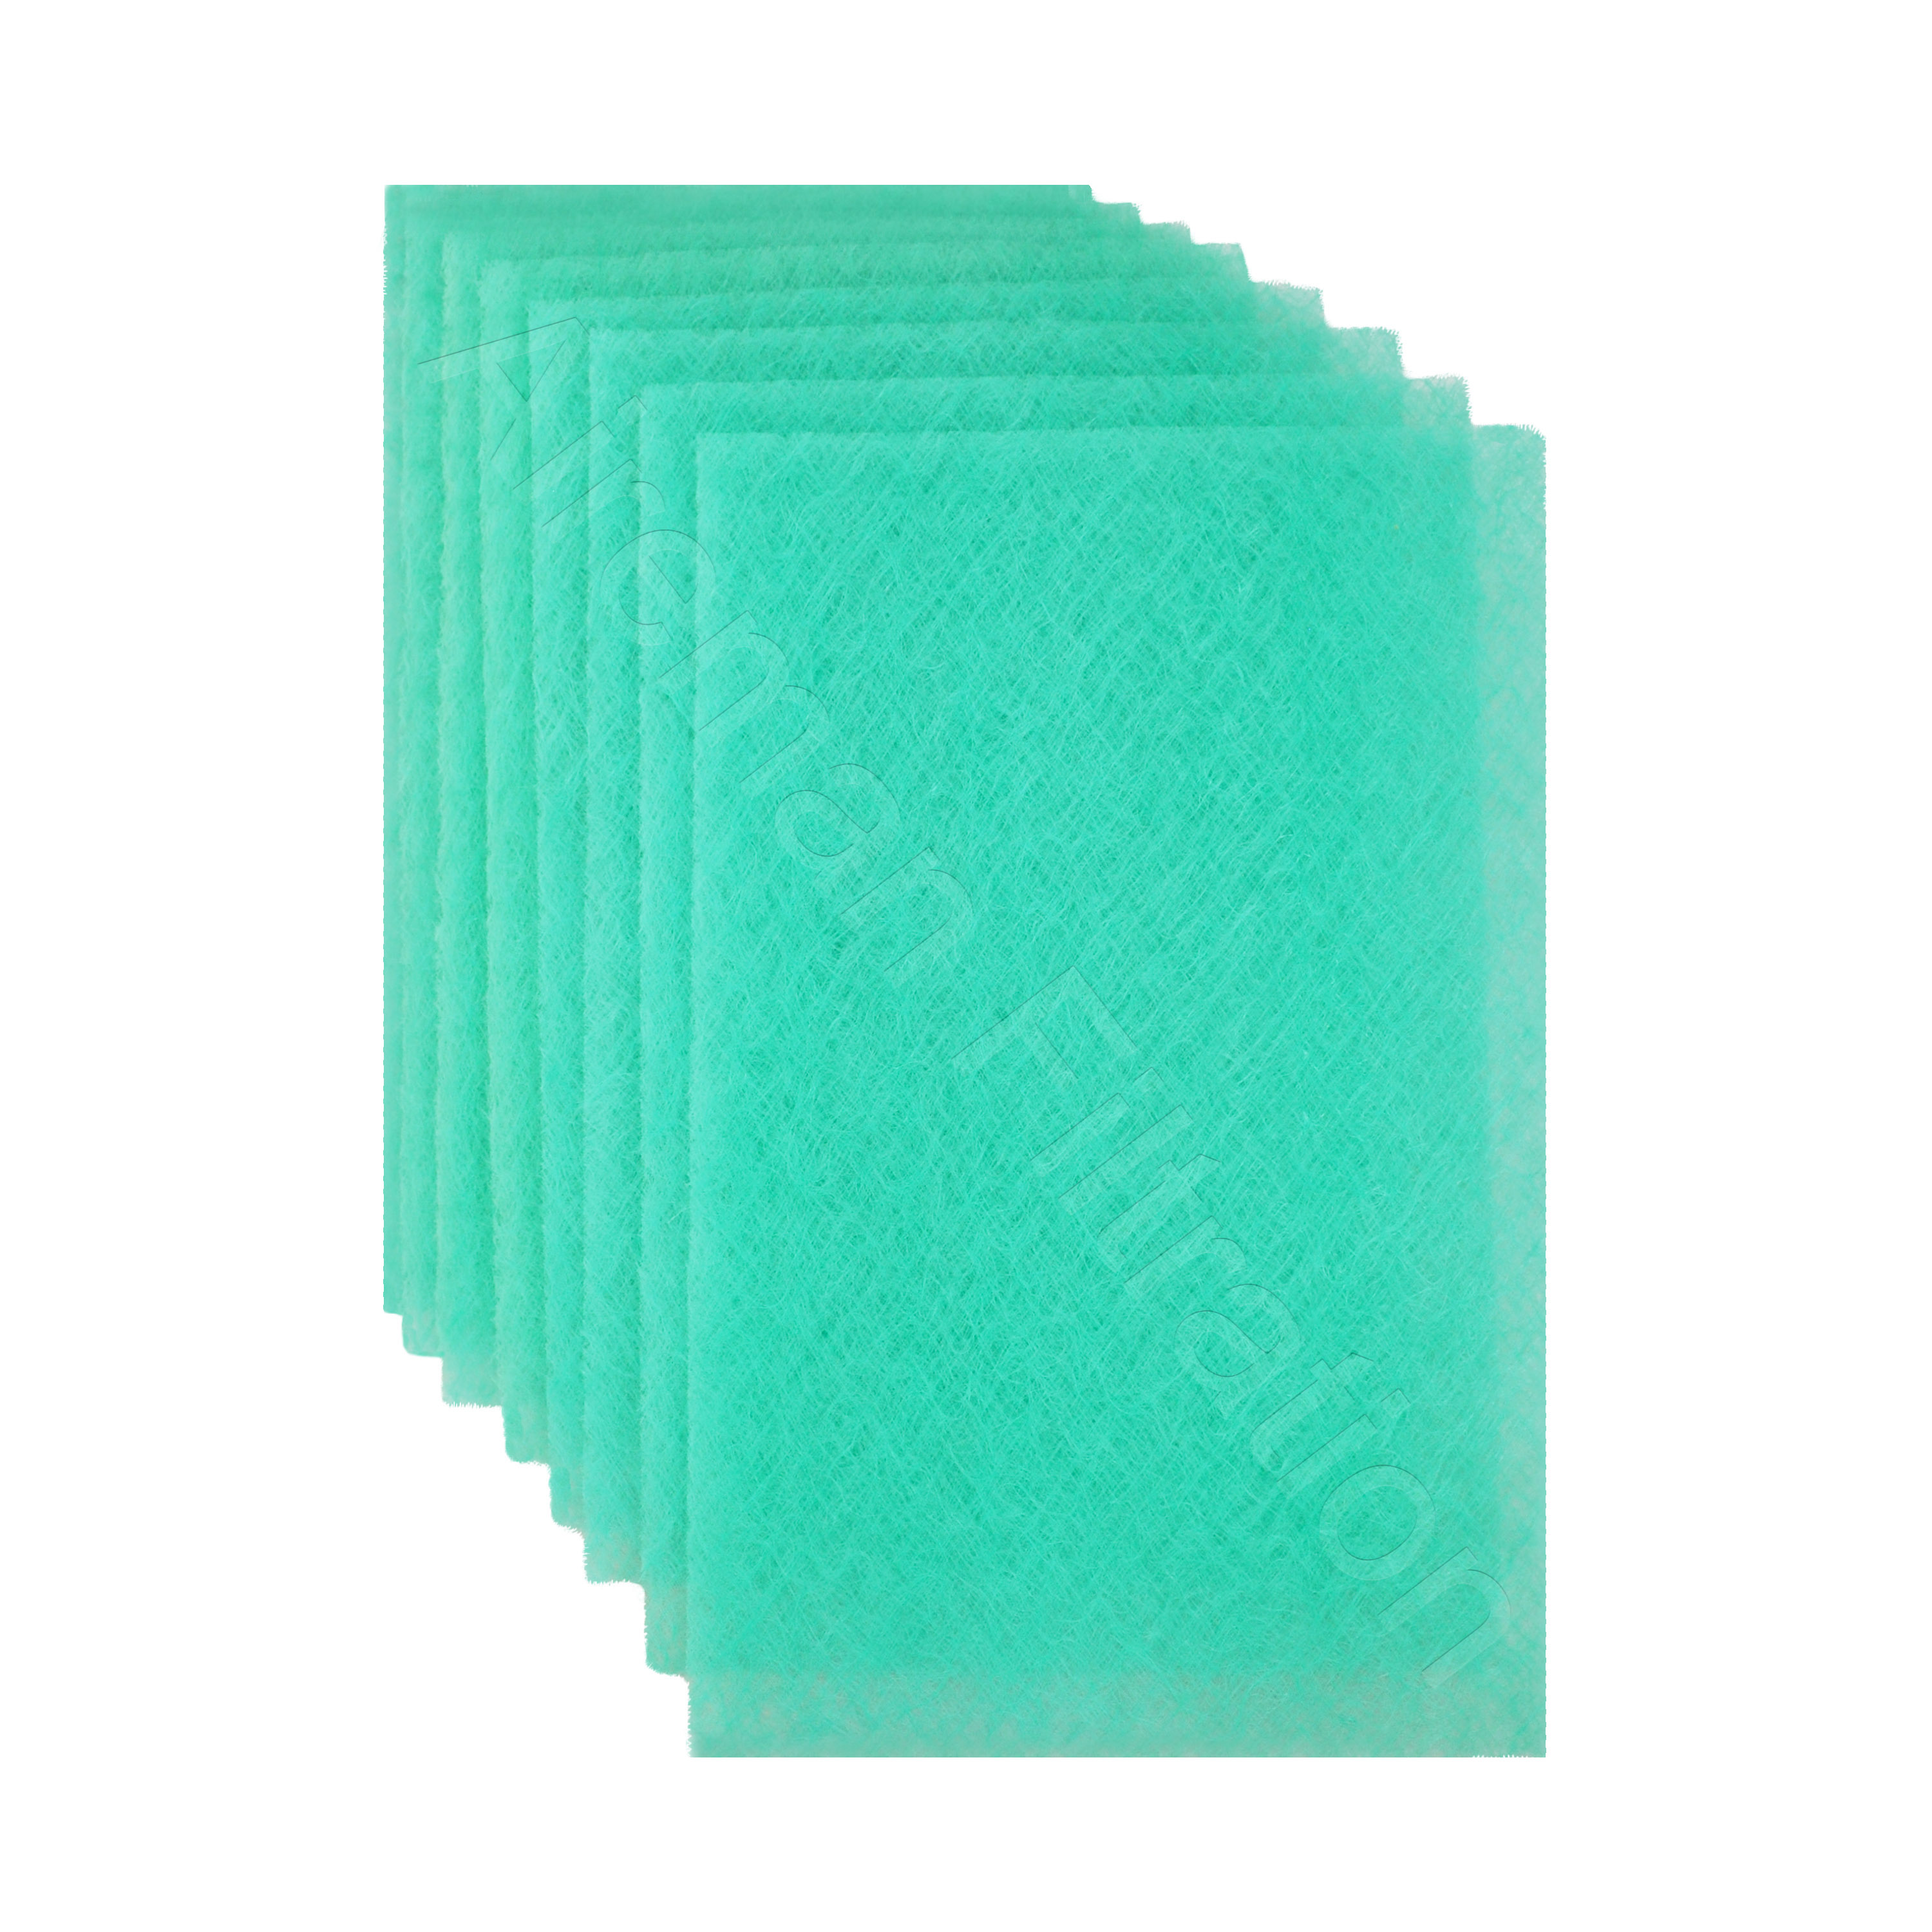 Aireman Filtration Wingman1 - 20x25x1 Electronic AC Furnace Air Filter Replacement Pads Year Supply - 4 Changes